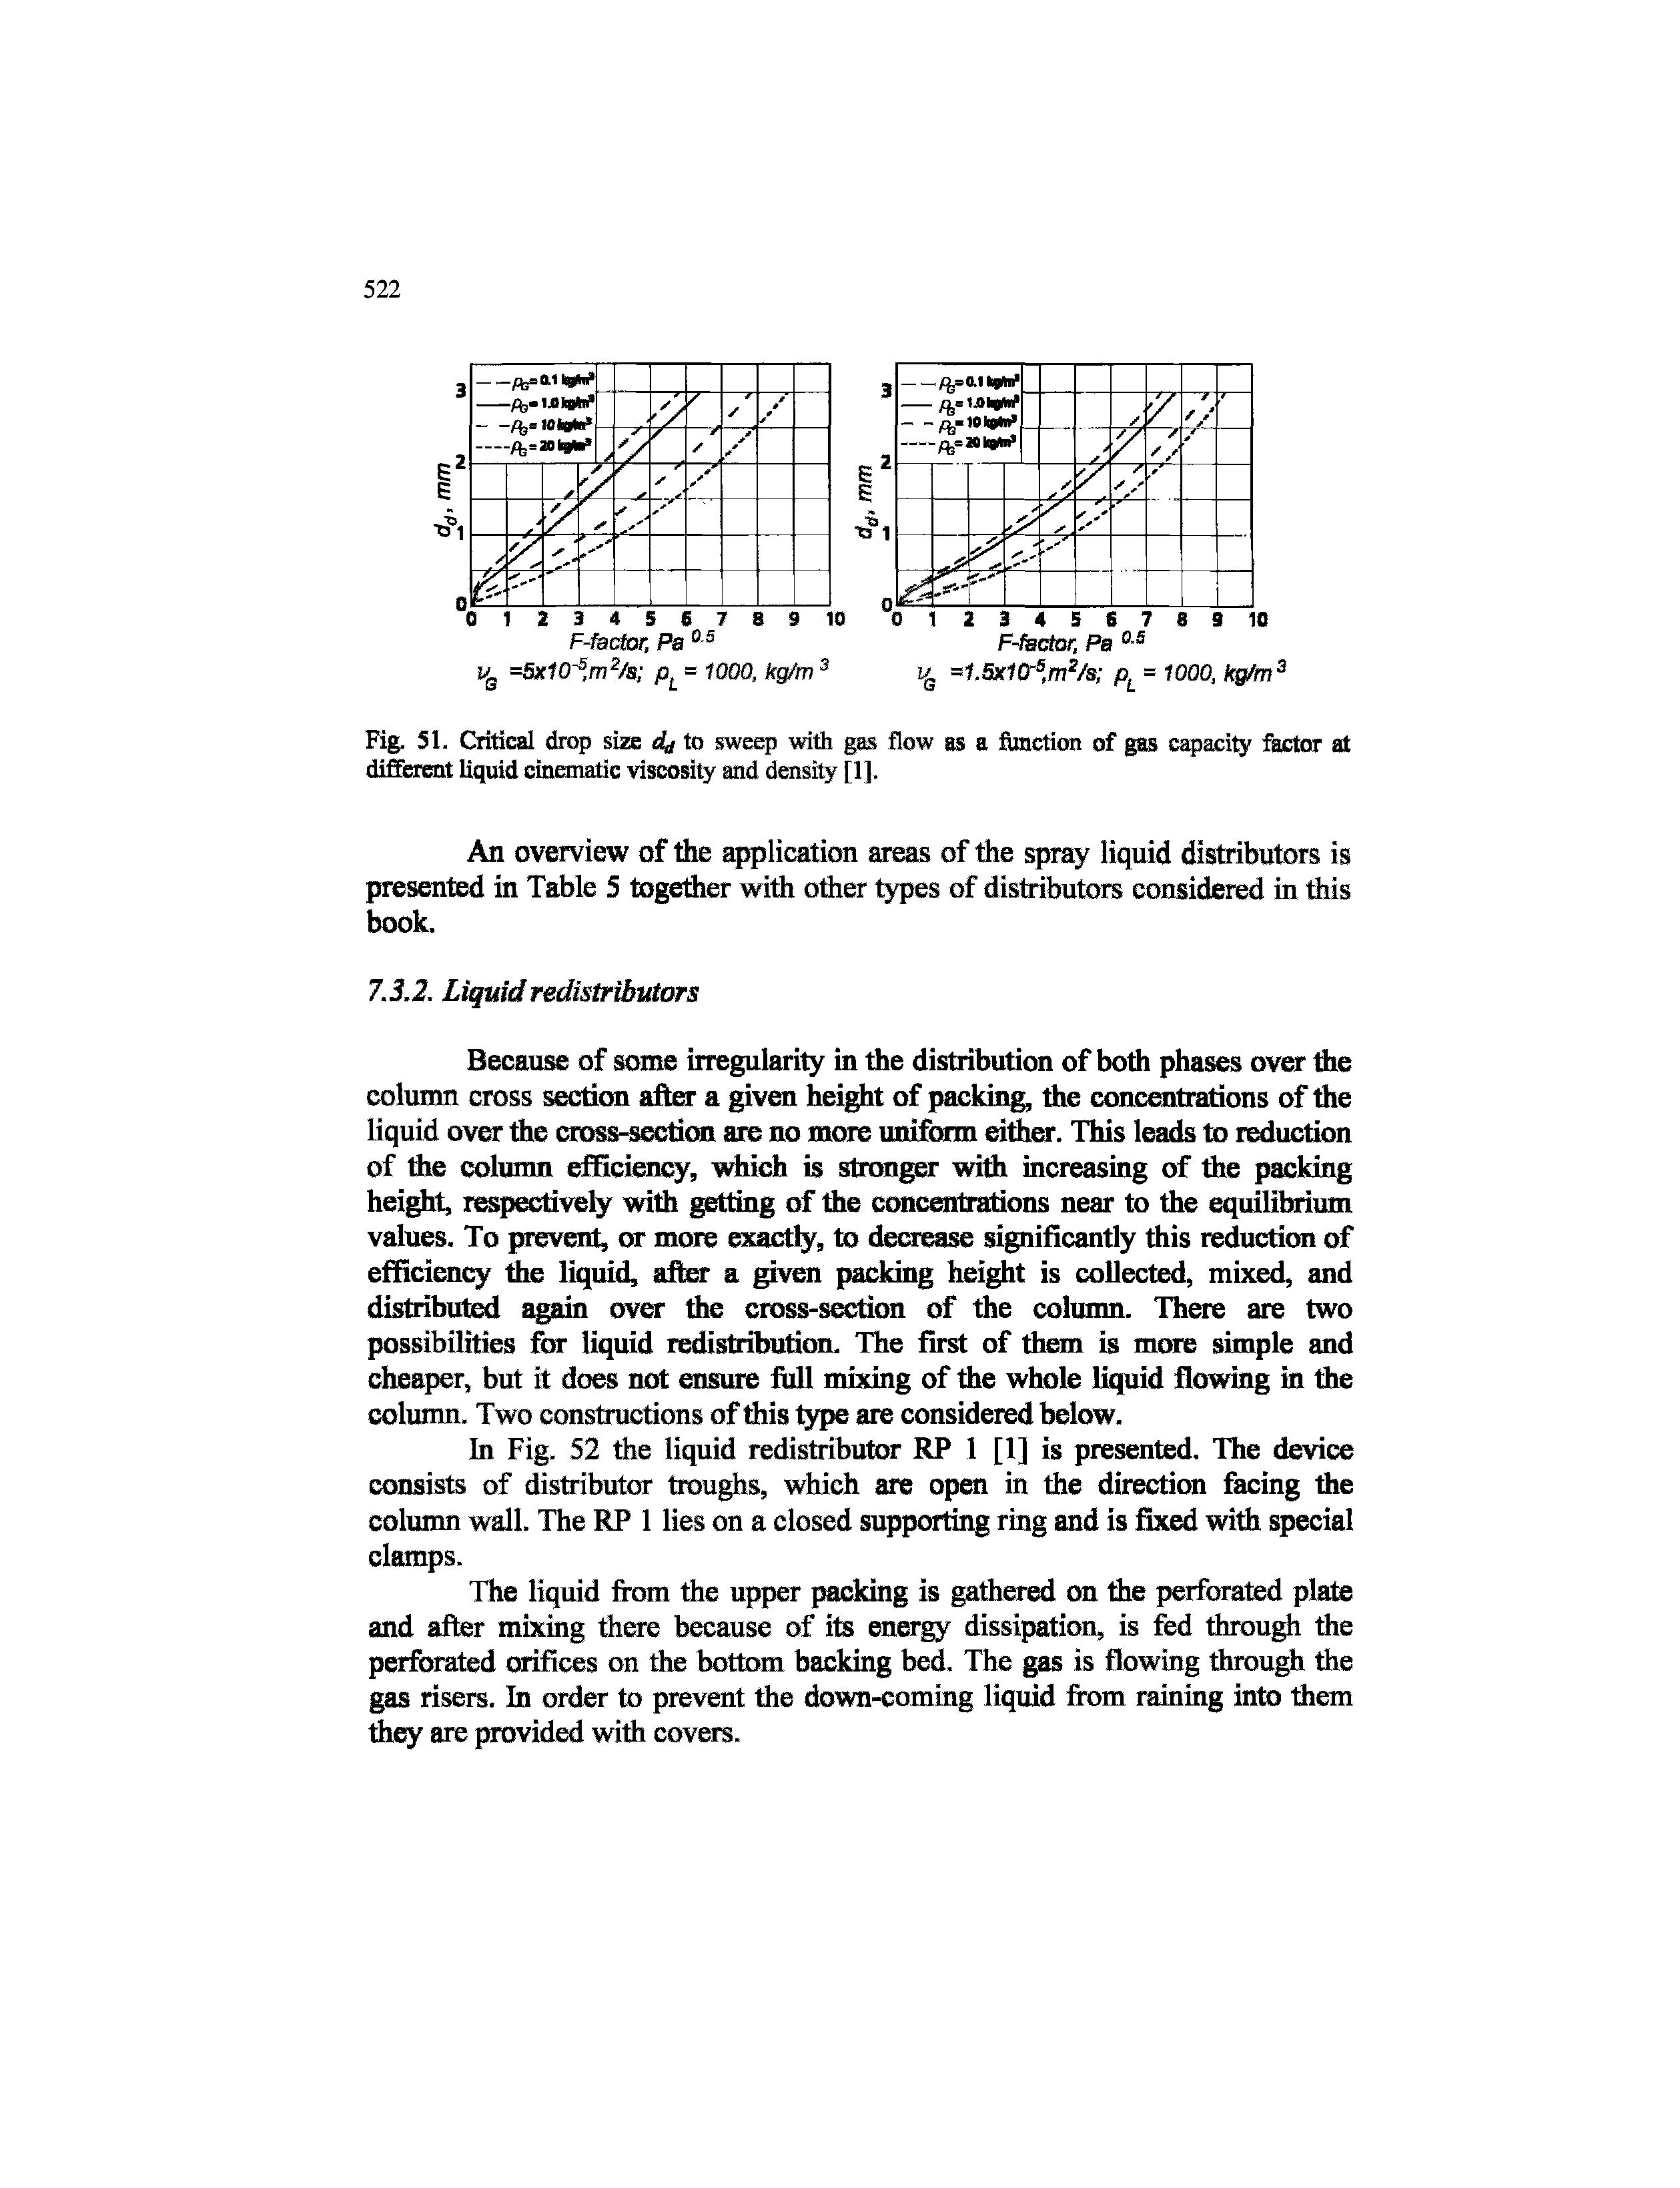 Fig. SI. Critical drop size 4r to sweep with gas flow as a fljnction of gas capacity factor at dififeieat liquid cinematic viscosity and density [1].